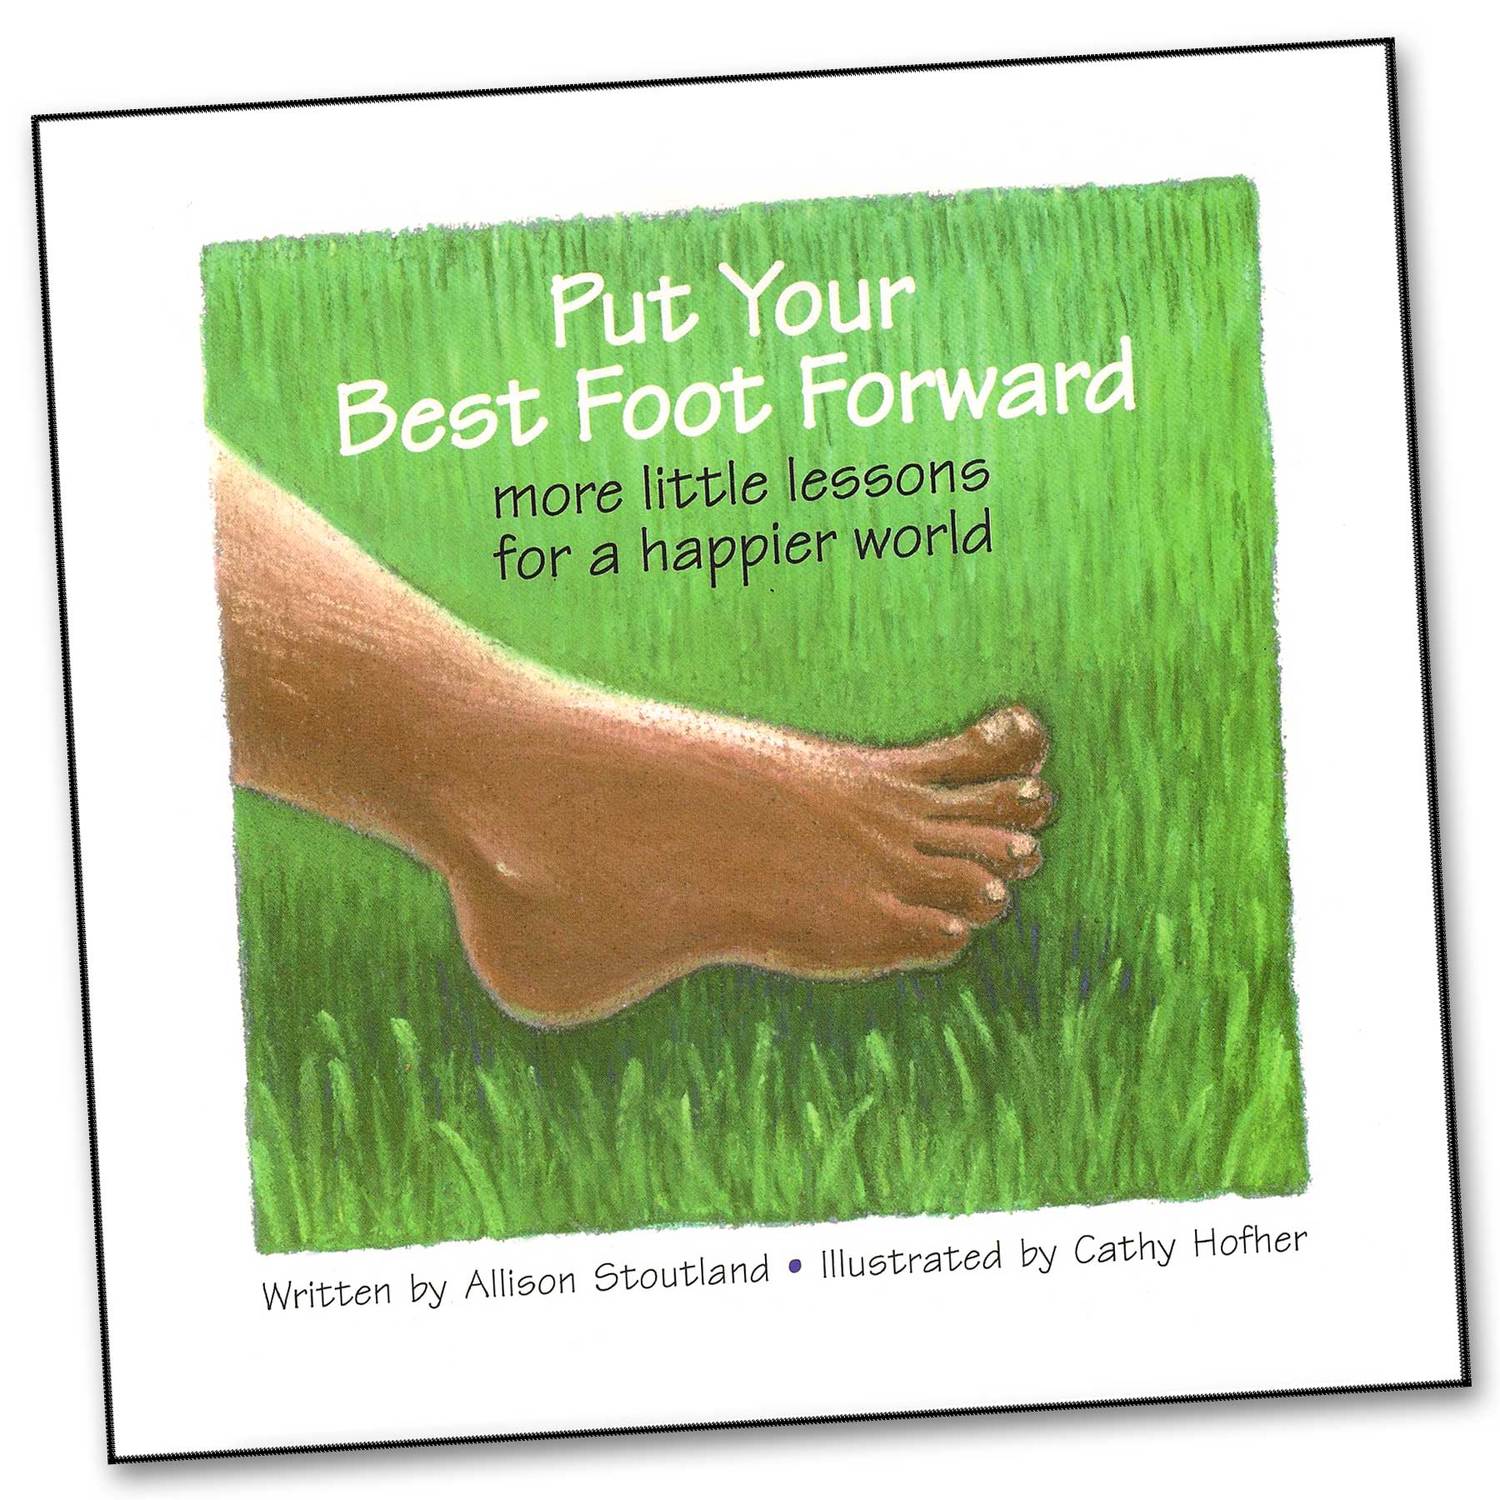 Foot forward. Put your best foot forward. Good foot. June Allyson best foot forward. Картинка put one's foot down.